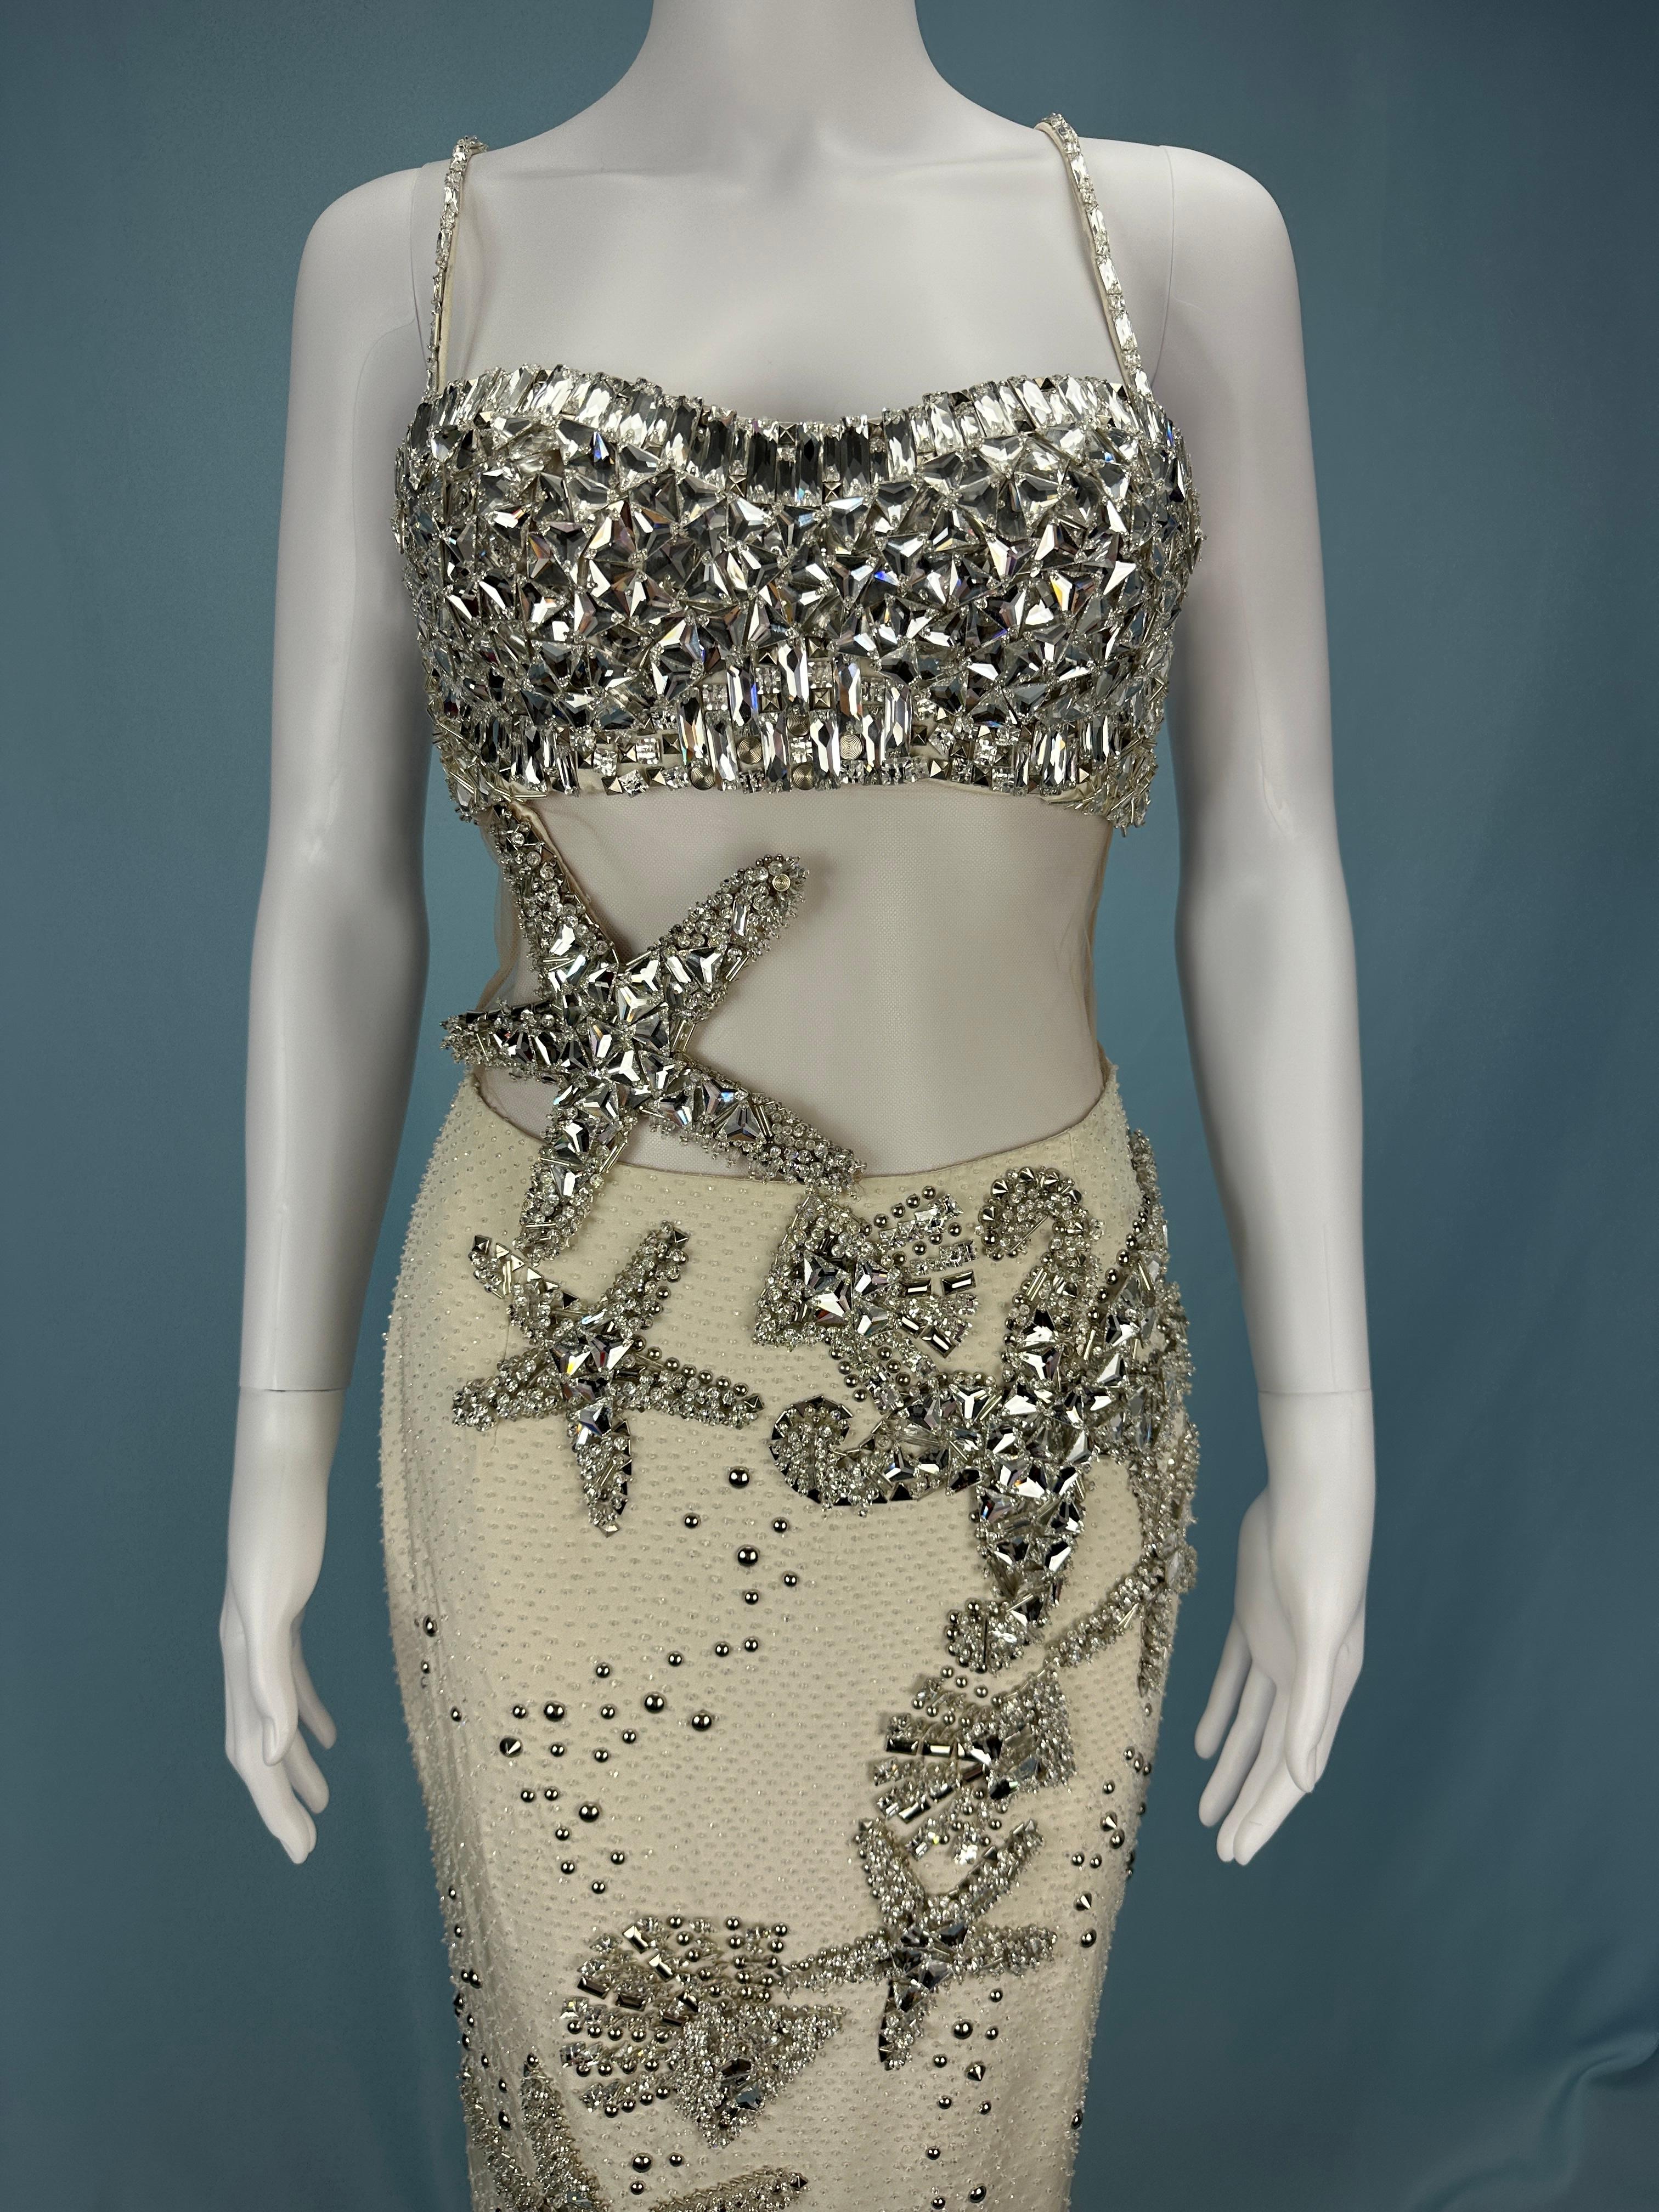 Atelier Versace Spring 2012 Runway Crystal Embellished Starfish Shell Dress 4